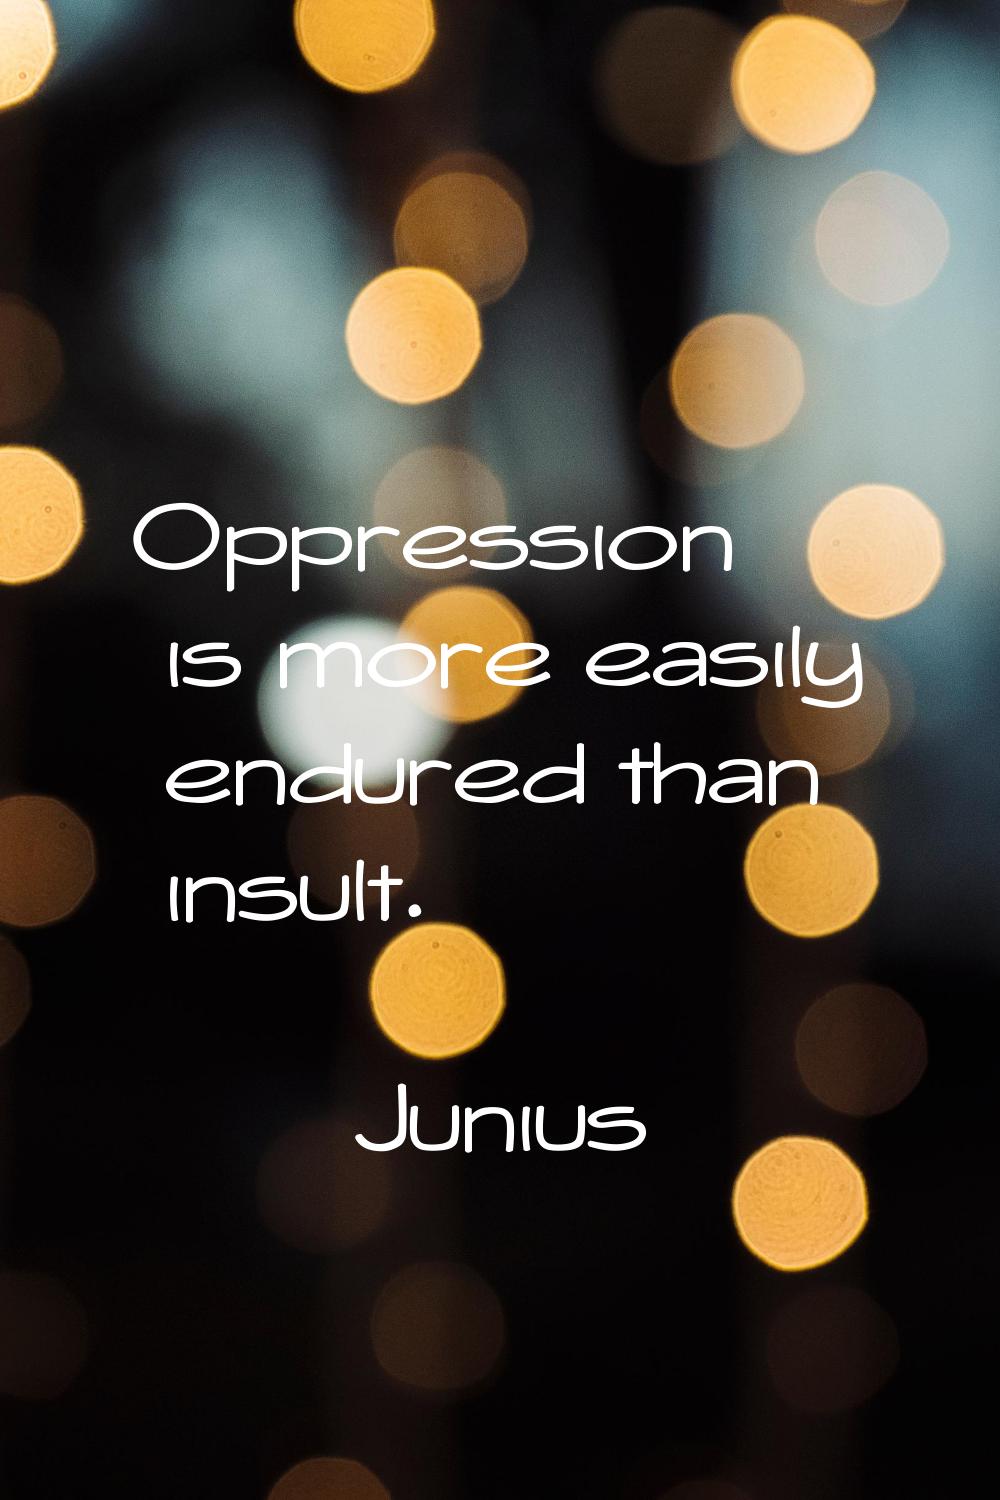 Oppression is more easily endured than insult.